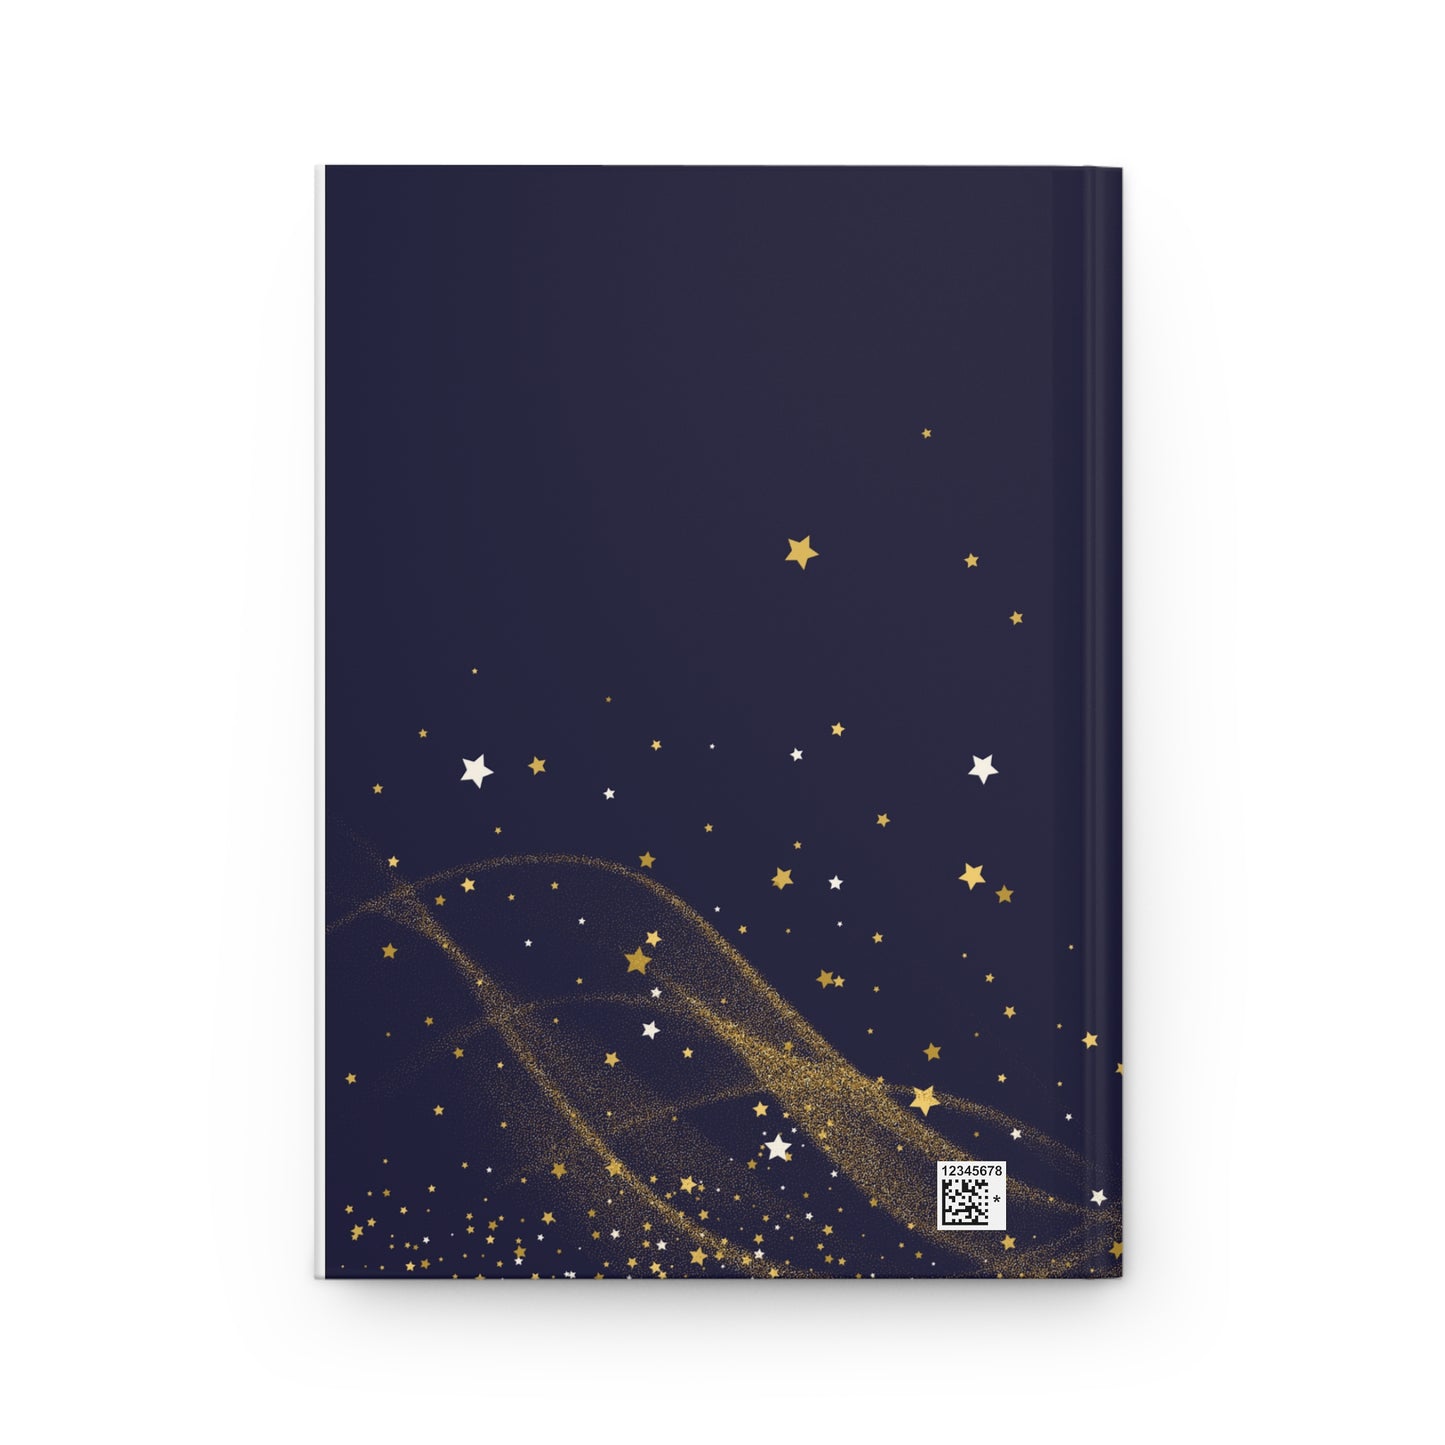 Reach for the Stars Hardcover Journal Matte